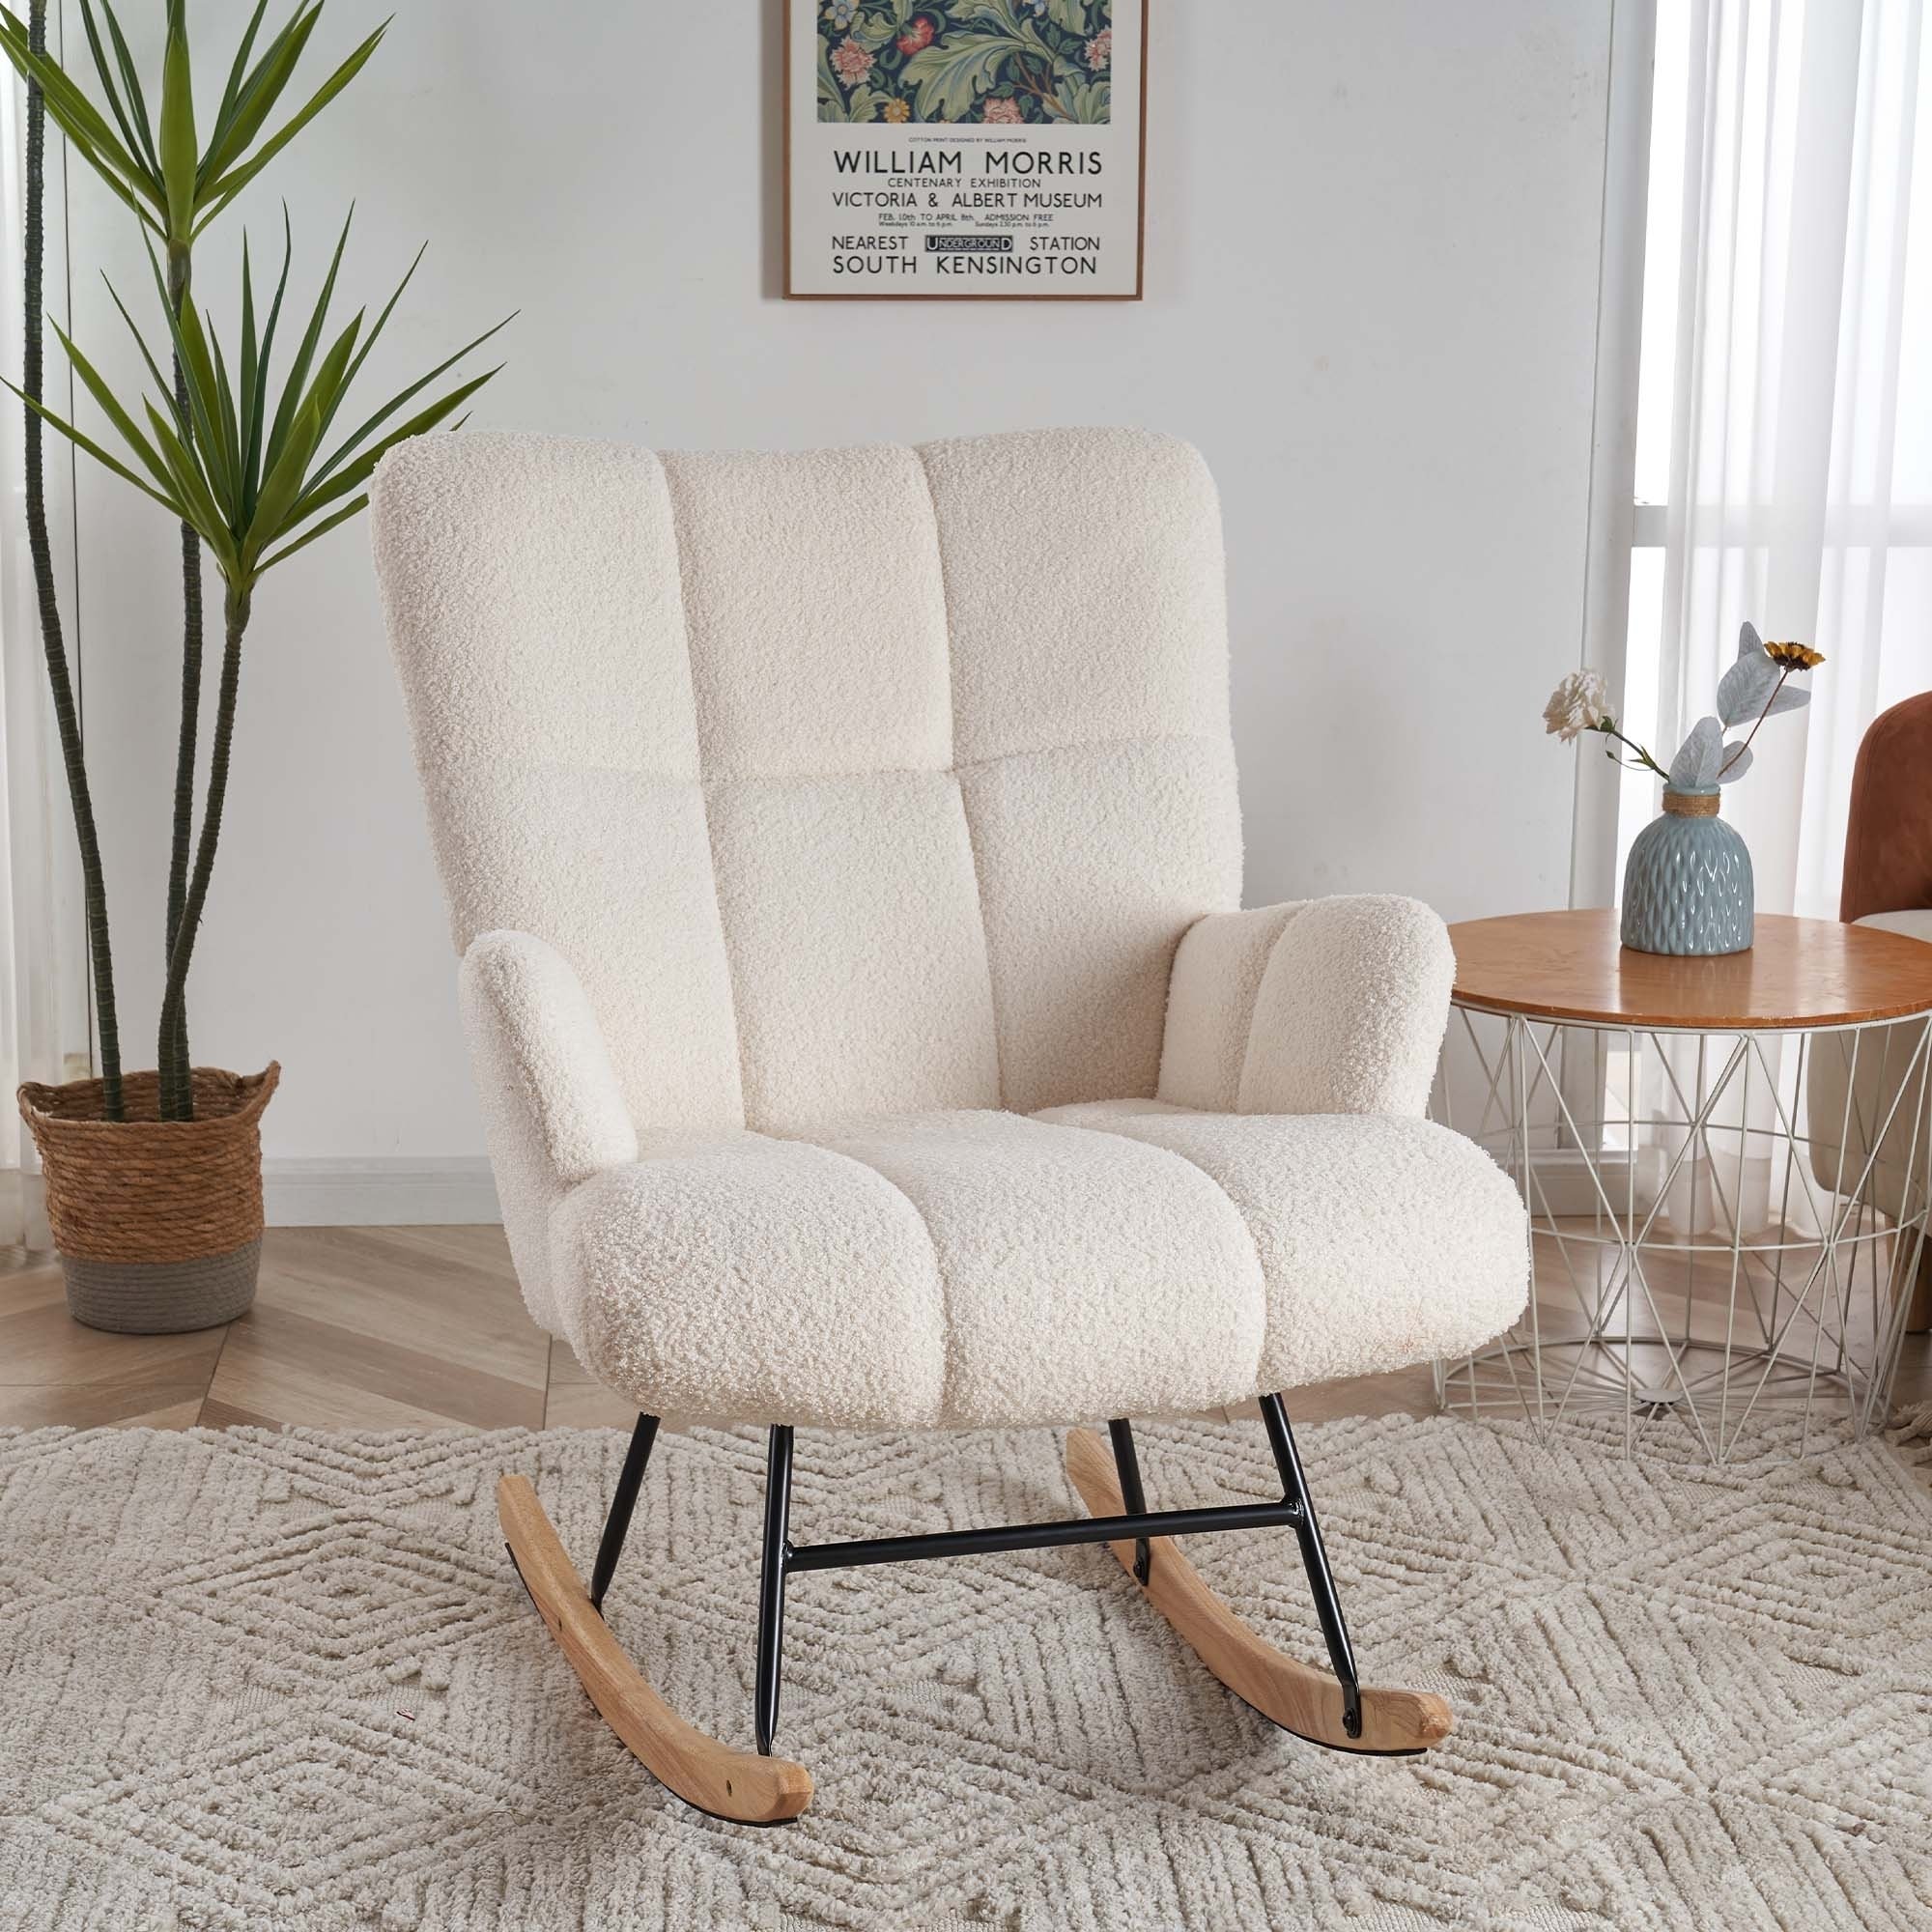 Rocking Accent Chair, Uplostered Glider Rocker Armchair For Baby Nursery, Comfy Side Chair For Living Room, Bedroom